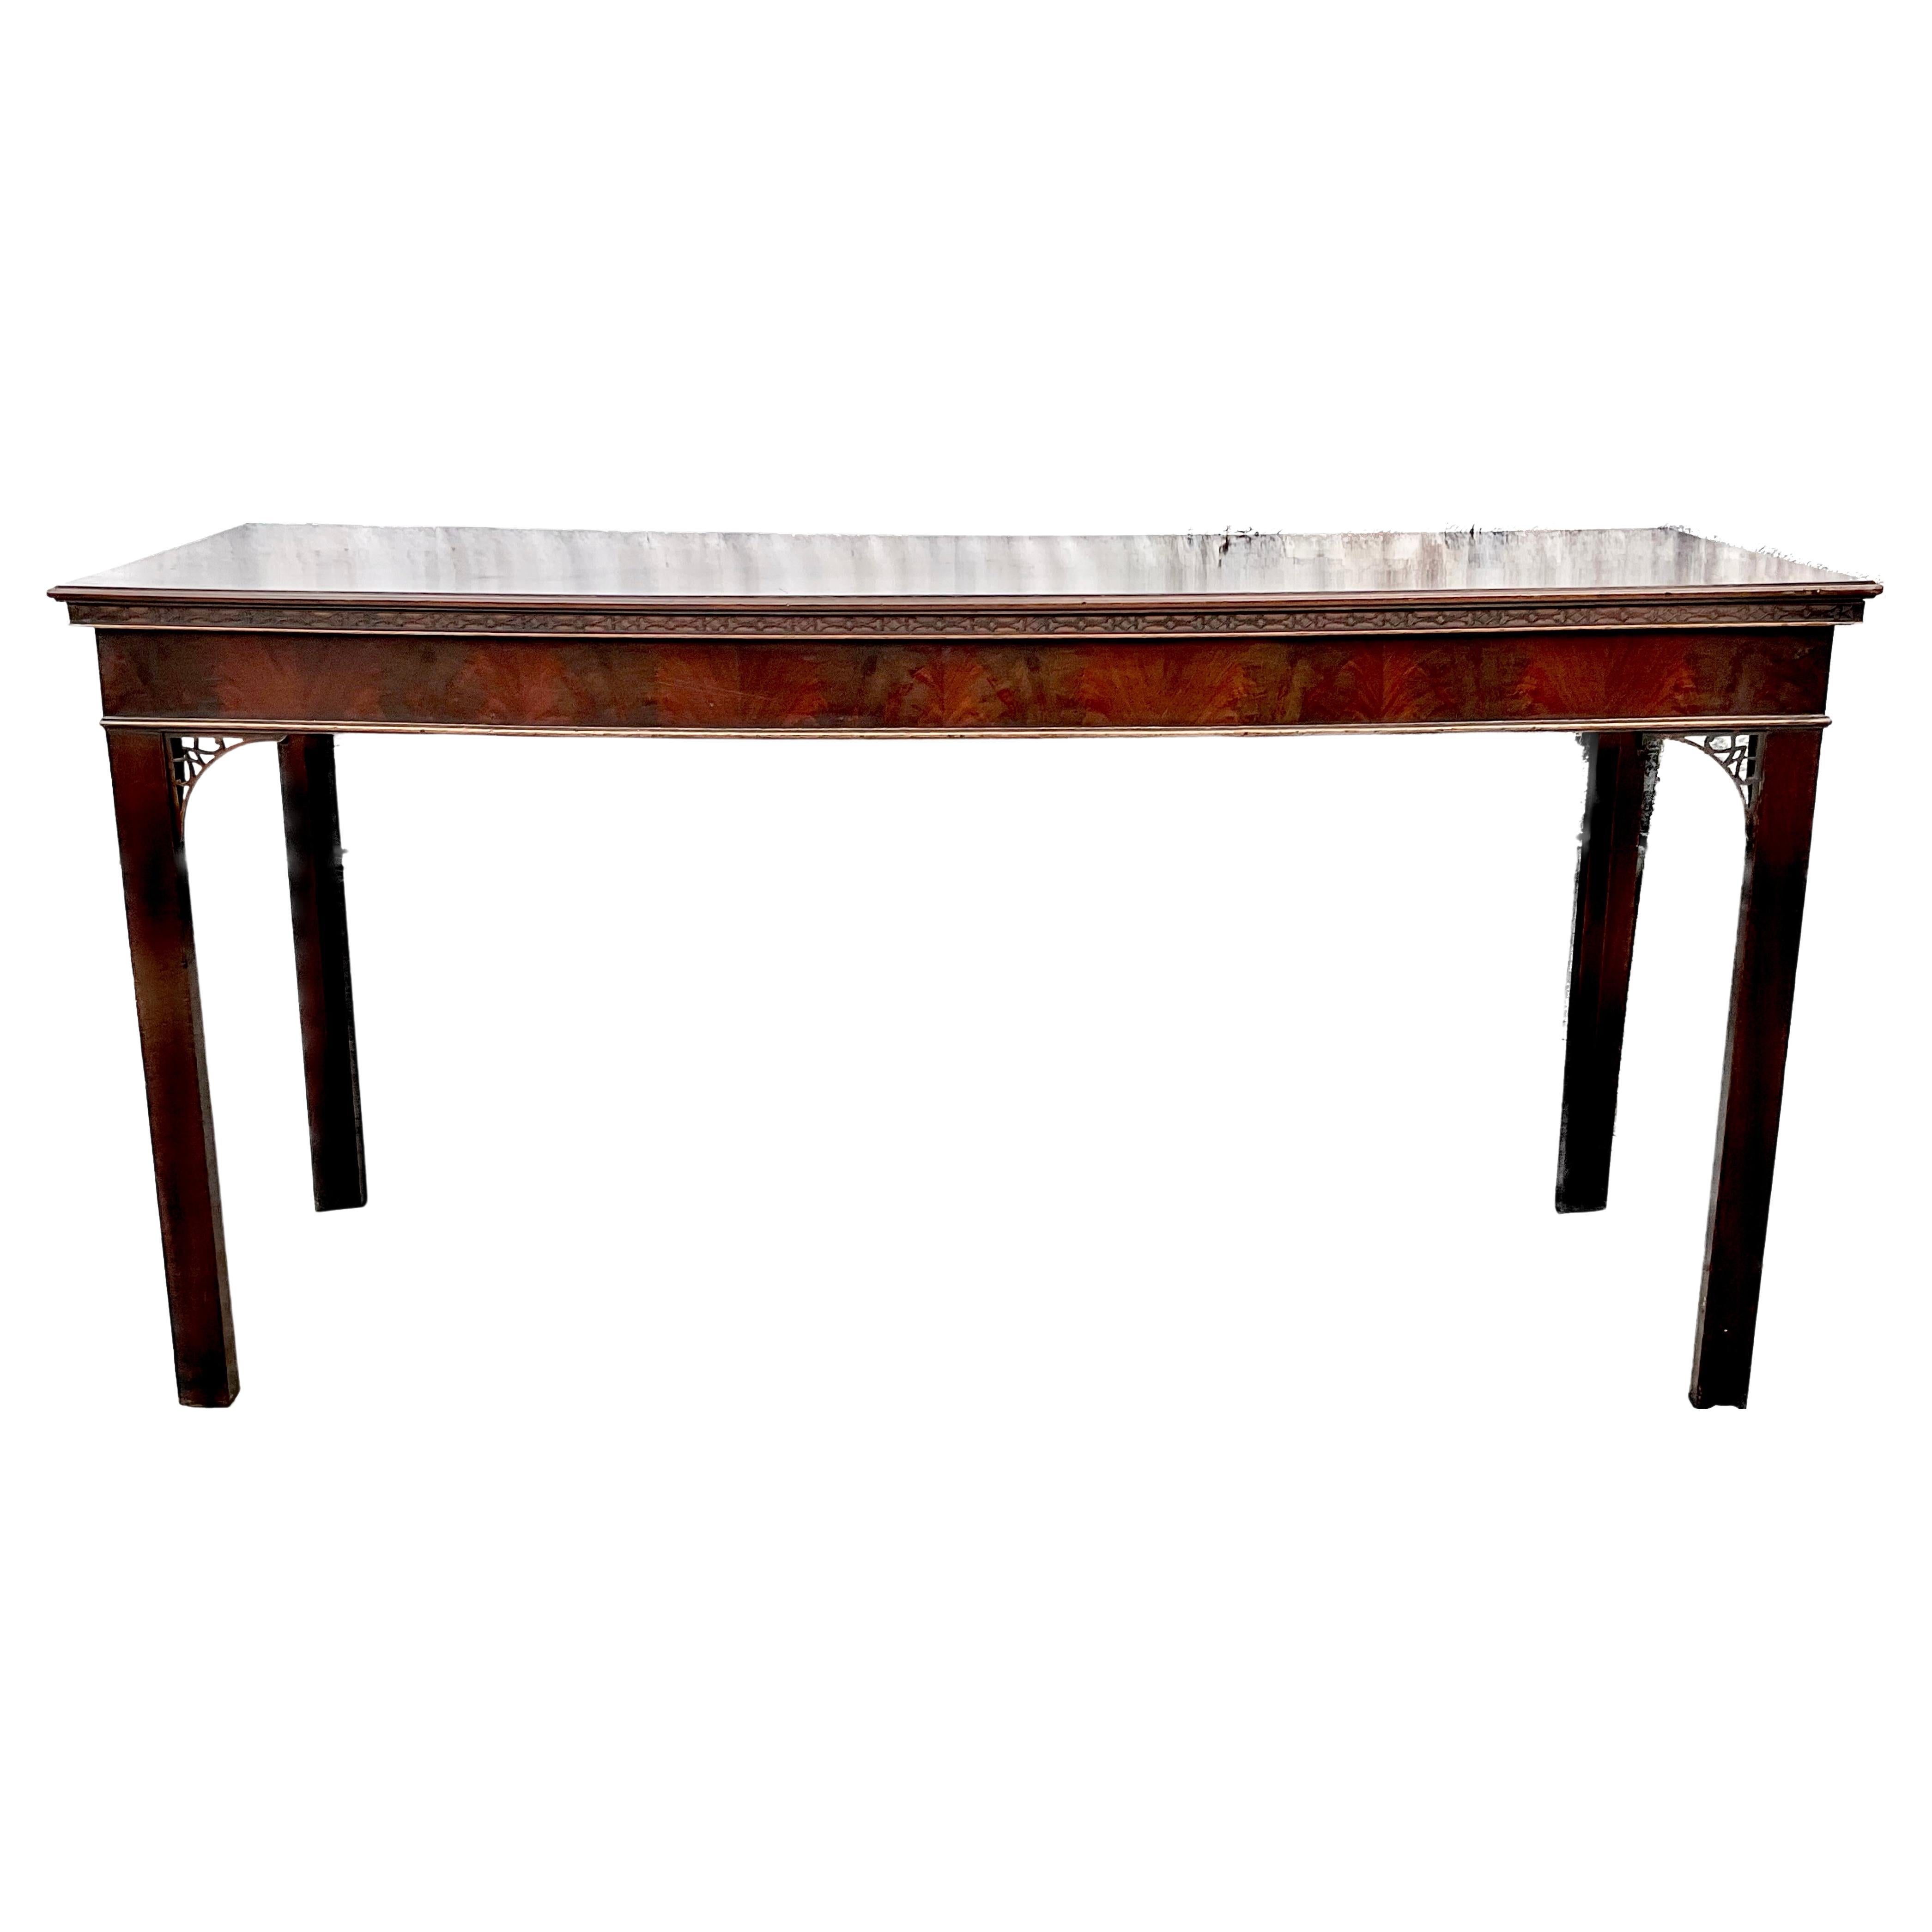 George III Chinese Chippendale Mahogany Serving Table. English. Table has a rectangular top with carved molded edge in the Chinese Chippendale manner over a wide frieze apron with a cockbead molding. It is raised on square legs with chamfered